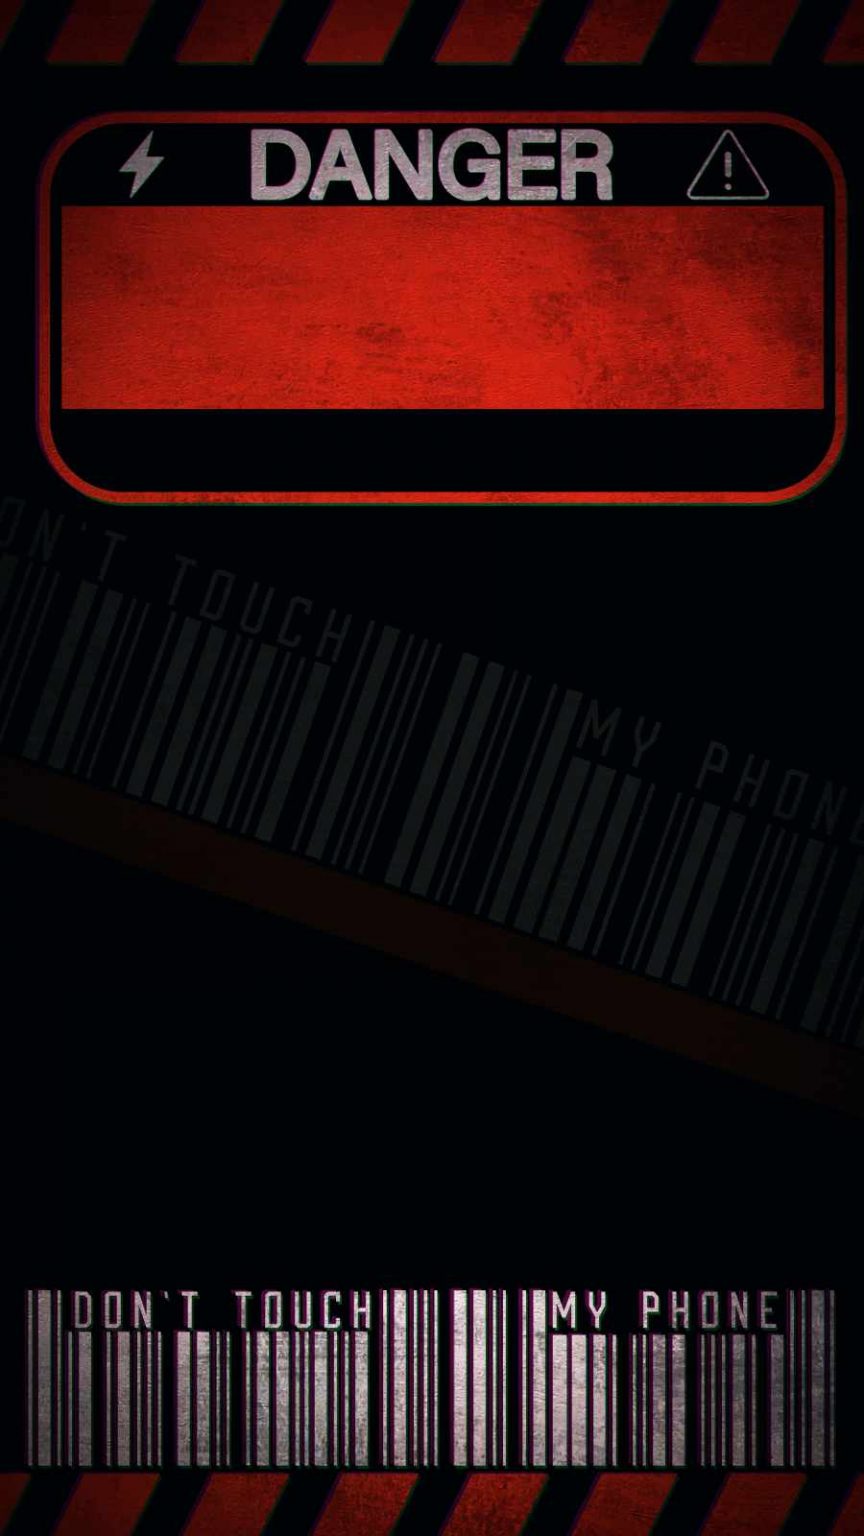 Danger Do Not Touch my Phone iPhone Wallpaper - iPhone Wallpapers